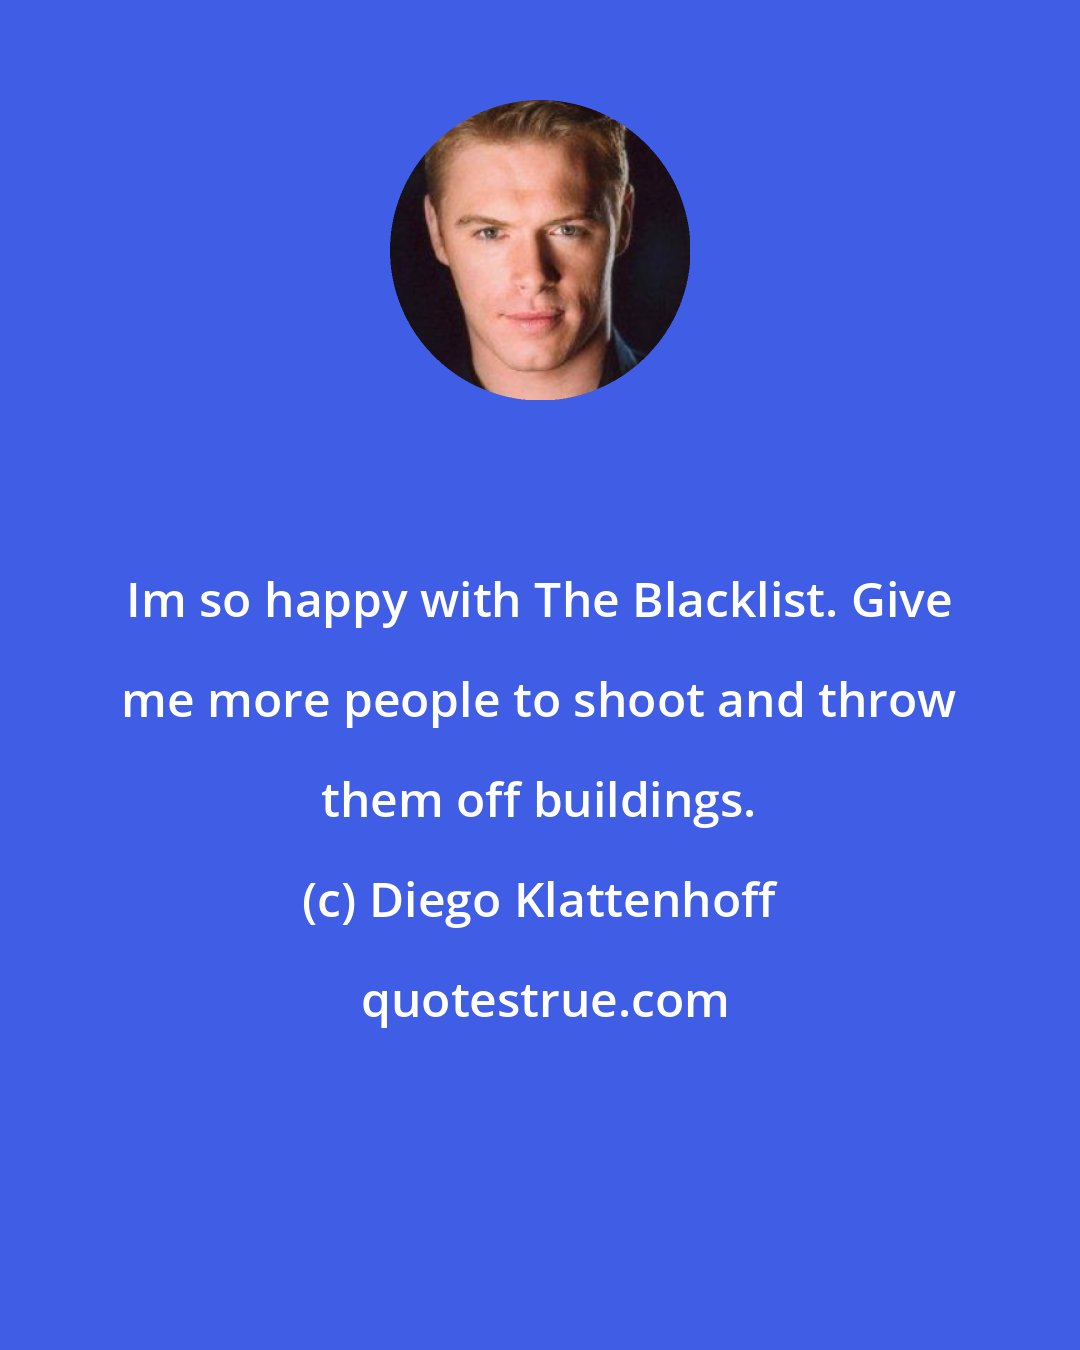 Diego Klattenhoff: Im so happy with The Blacklist. Give me more people to shoot and throw them off buildings.